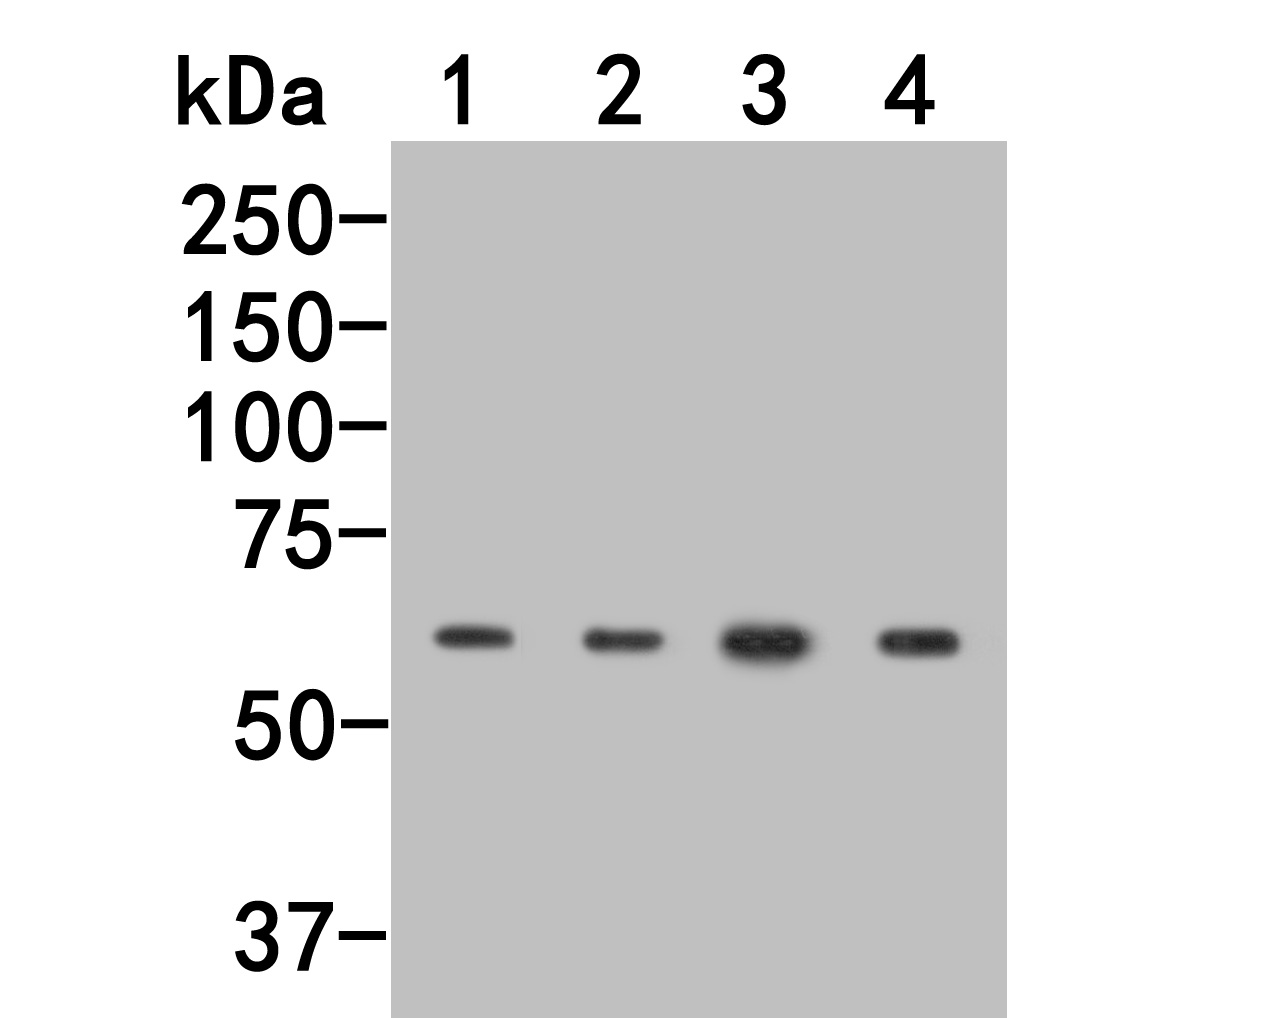 Western blot analysis of PPP2R1A on different lysates. Proteins were transferred to a PVDF membrane and blocked with 5% BSA in PBS for 1 hour at room temperature. The primary antibody (HA500160, 1/1,000) was used in 5% BSA at room temperature for 2 hours. Goat Anti-Rabbit IgG - HRP Secondary Antibody (HA1001) at 1:200,000 dilution was used for 1 hour at room temperature.<br />
Positive control: <br />
Lane 1: Hela cell lysate<br />
Lane 2: 293 cell lysate<br />
Lane 3: Mouse cerebellum tissue lysate<br />
Lane 4: Rat brain tissue lysate